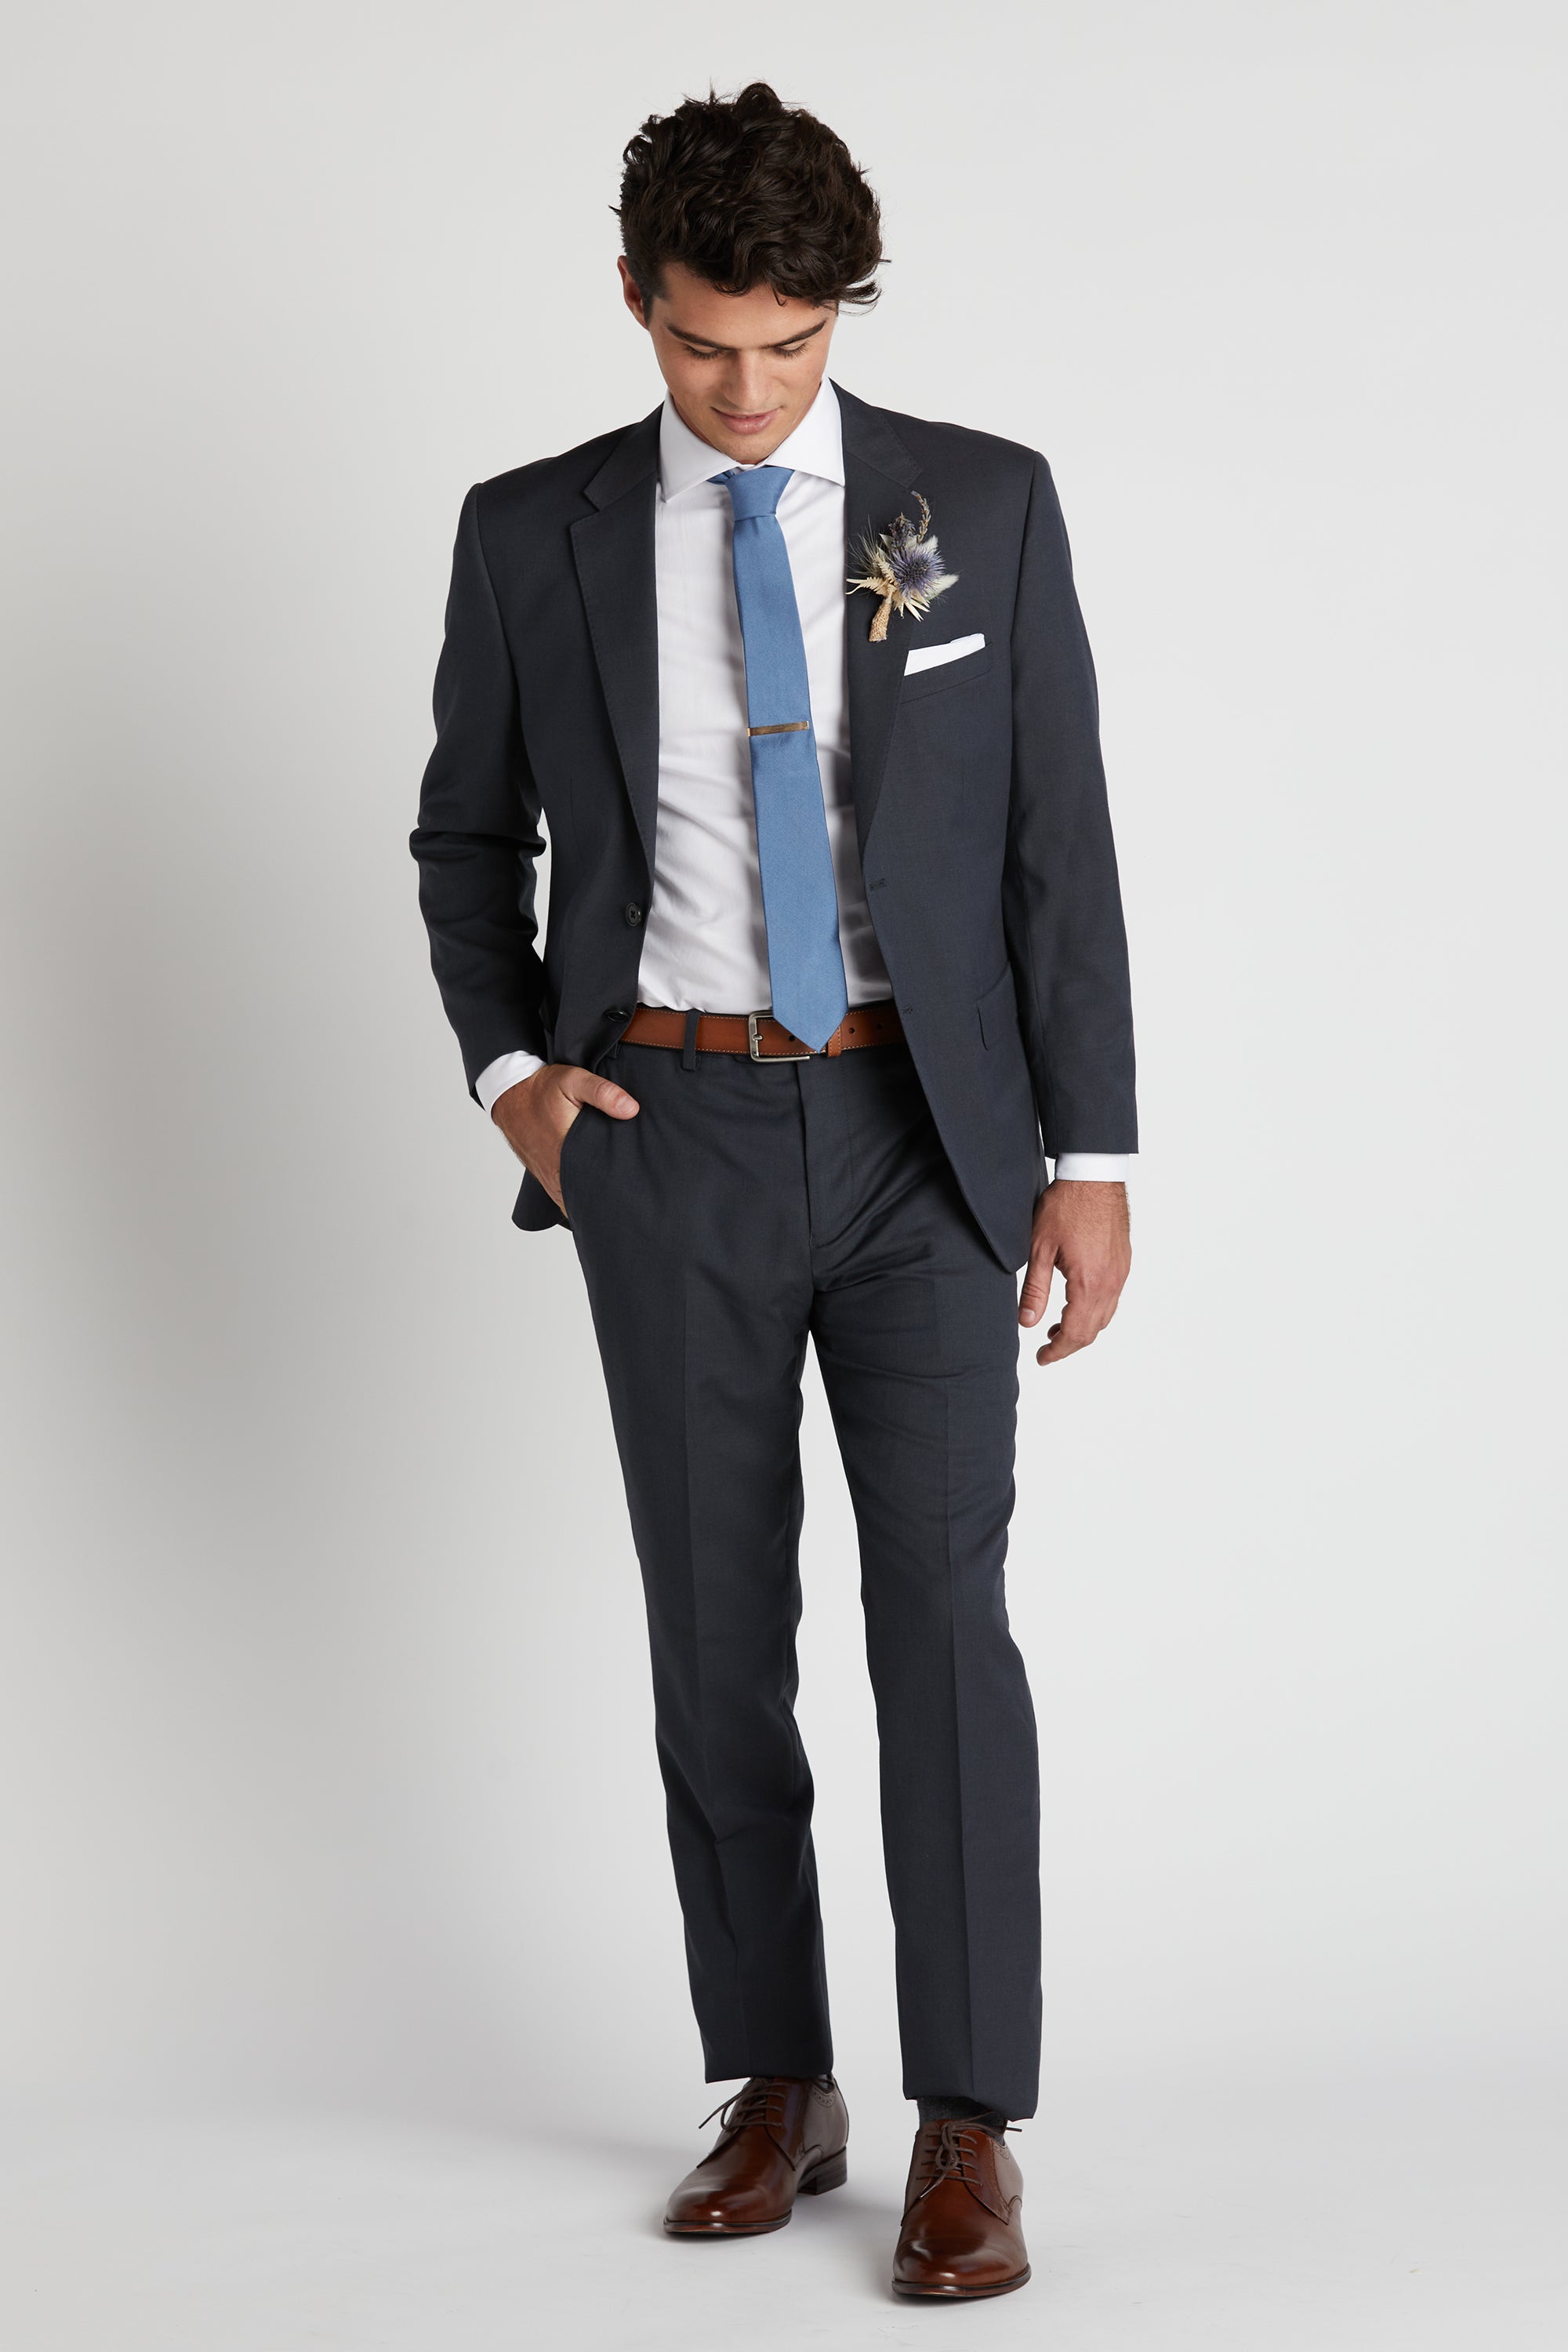 Charcoal Gray Suit Jacket by SuitShop